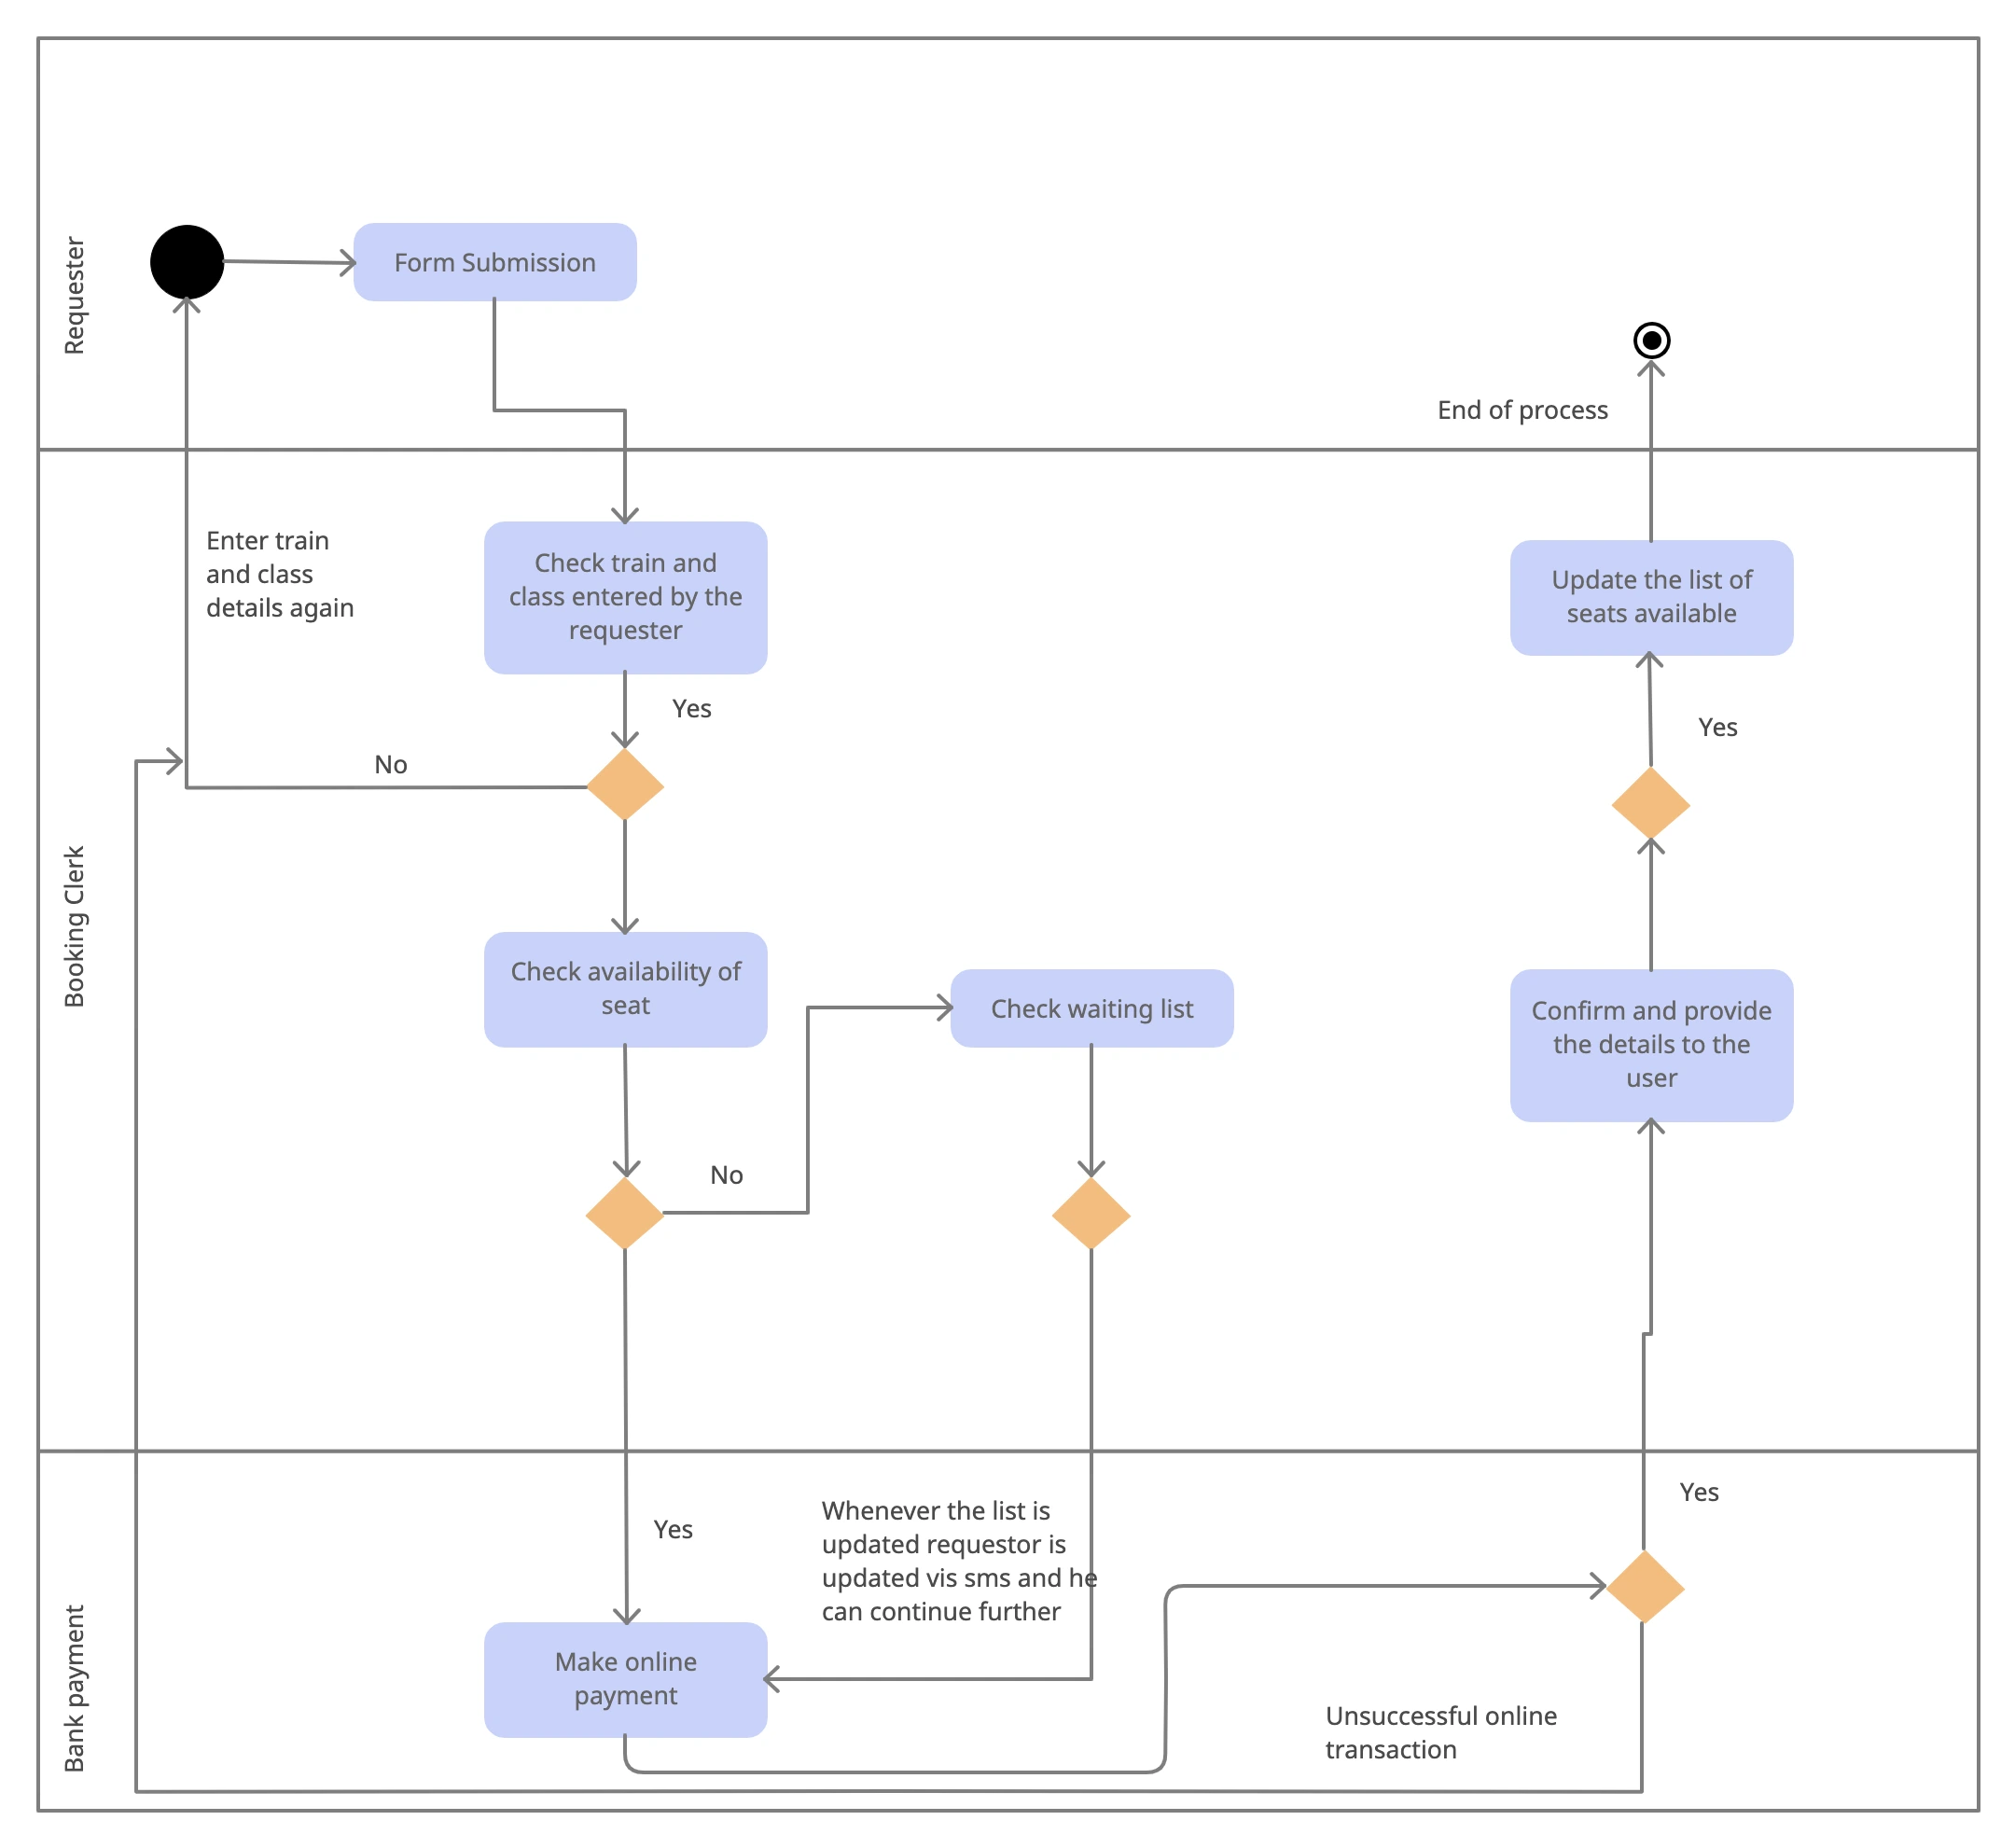 Activity Diagram for a Railway Reservation System